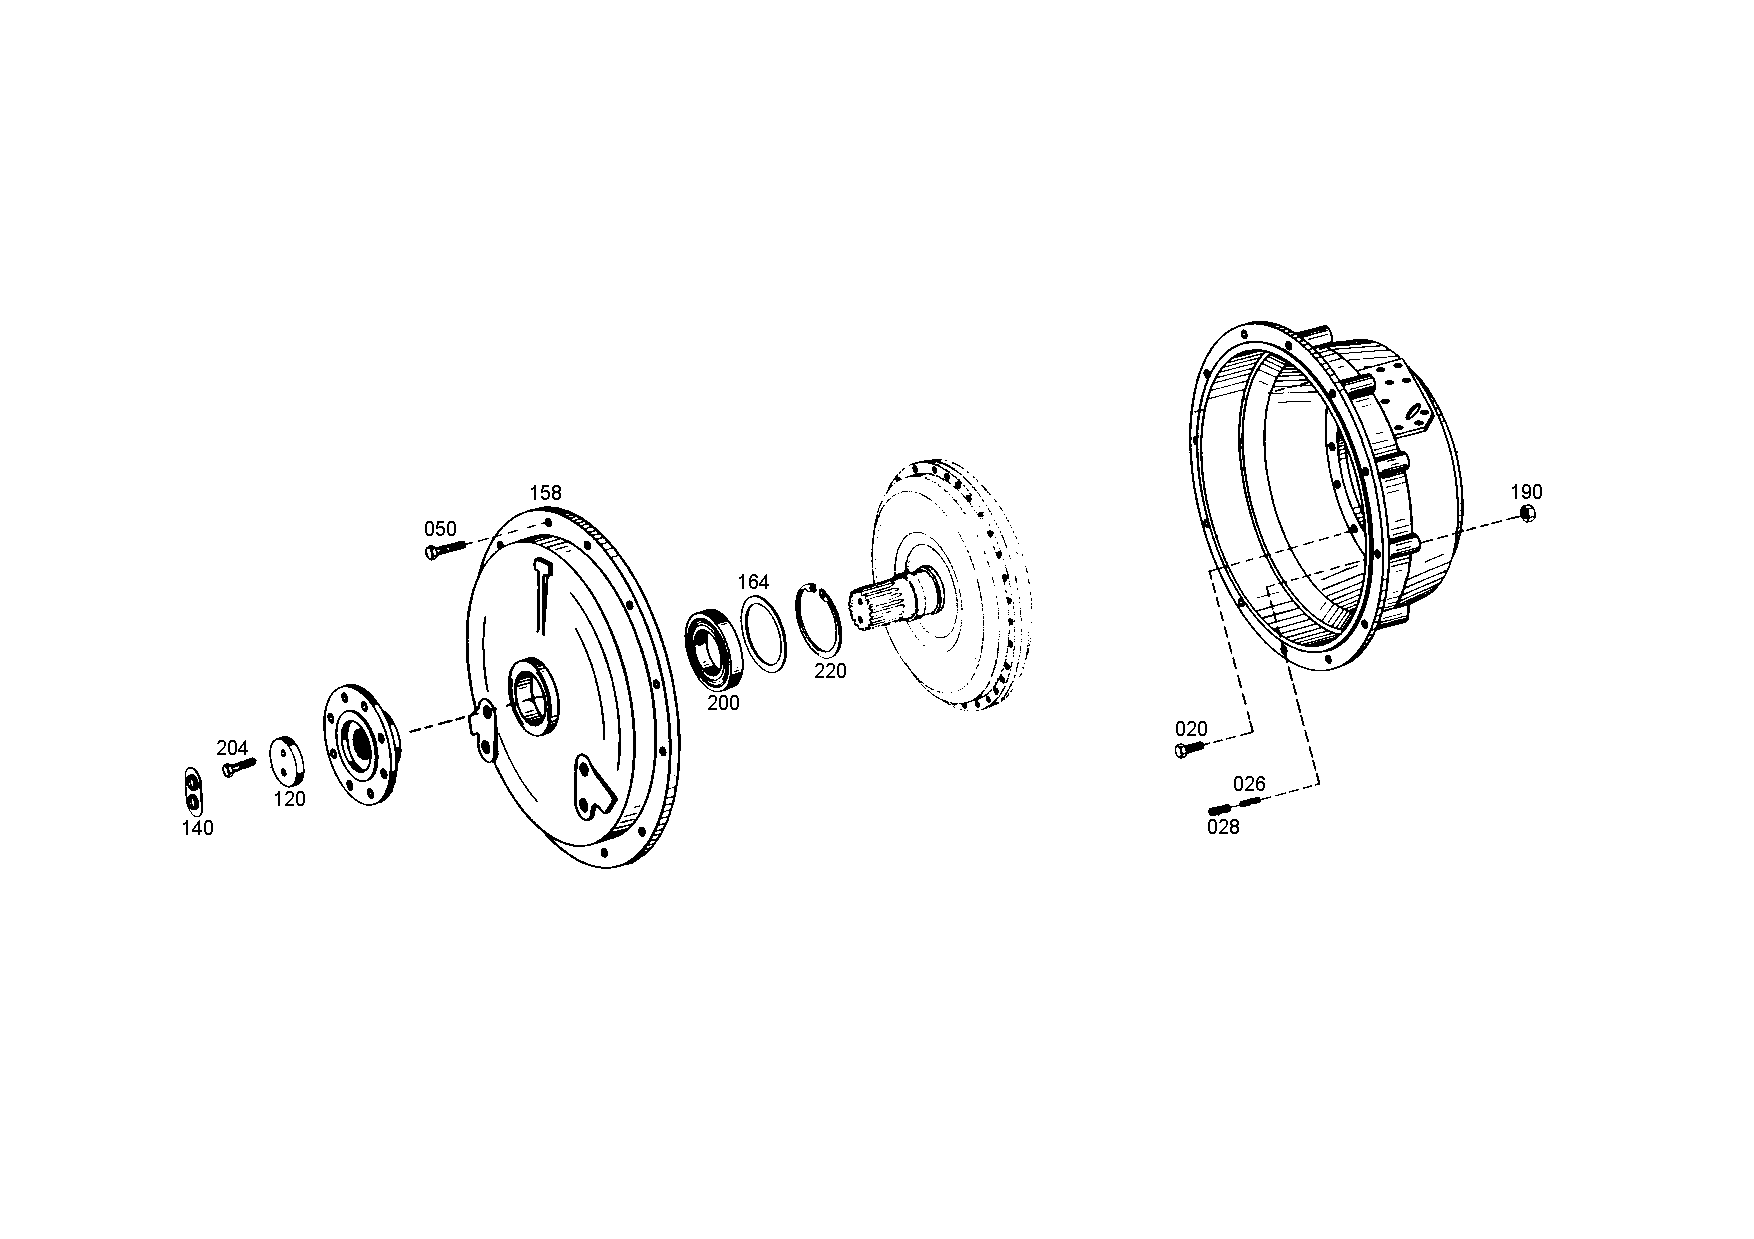 drawing for MOXY TRUCKS AS 052526 - WASHER (figure 4)